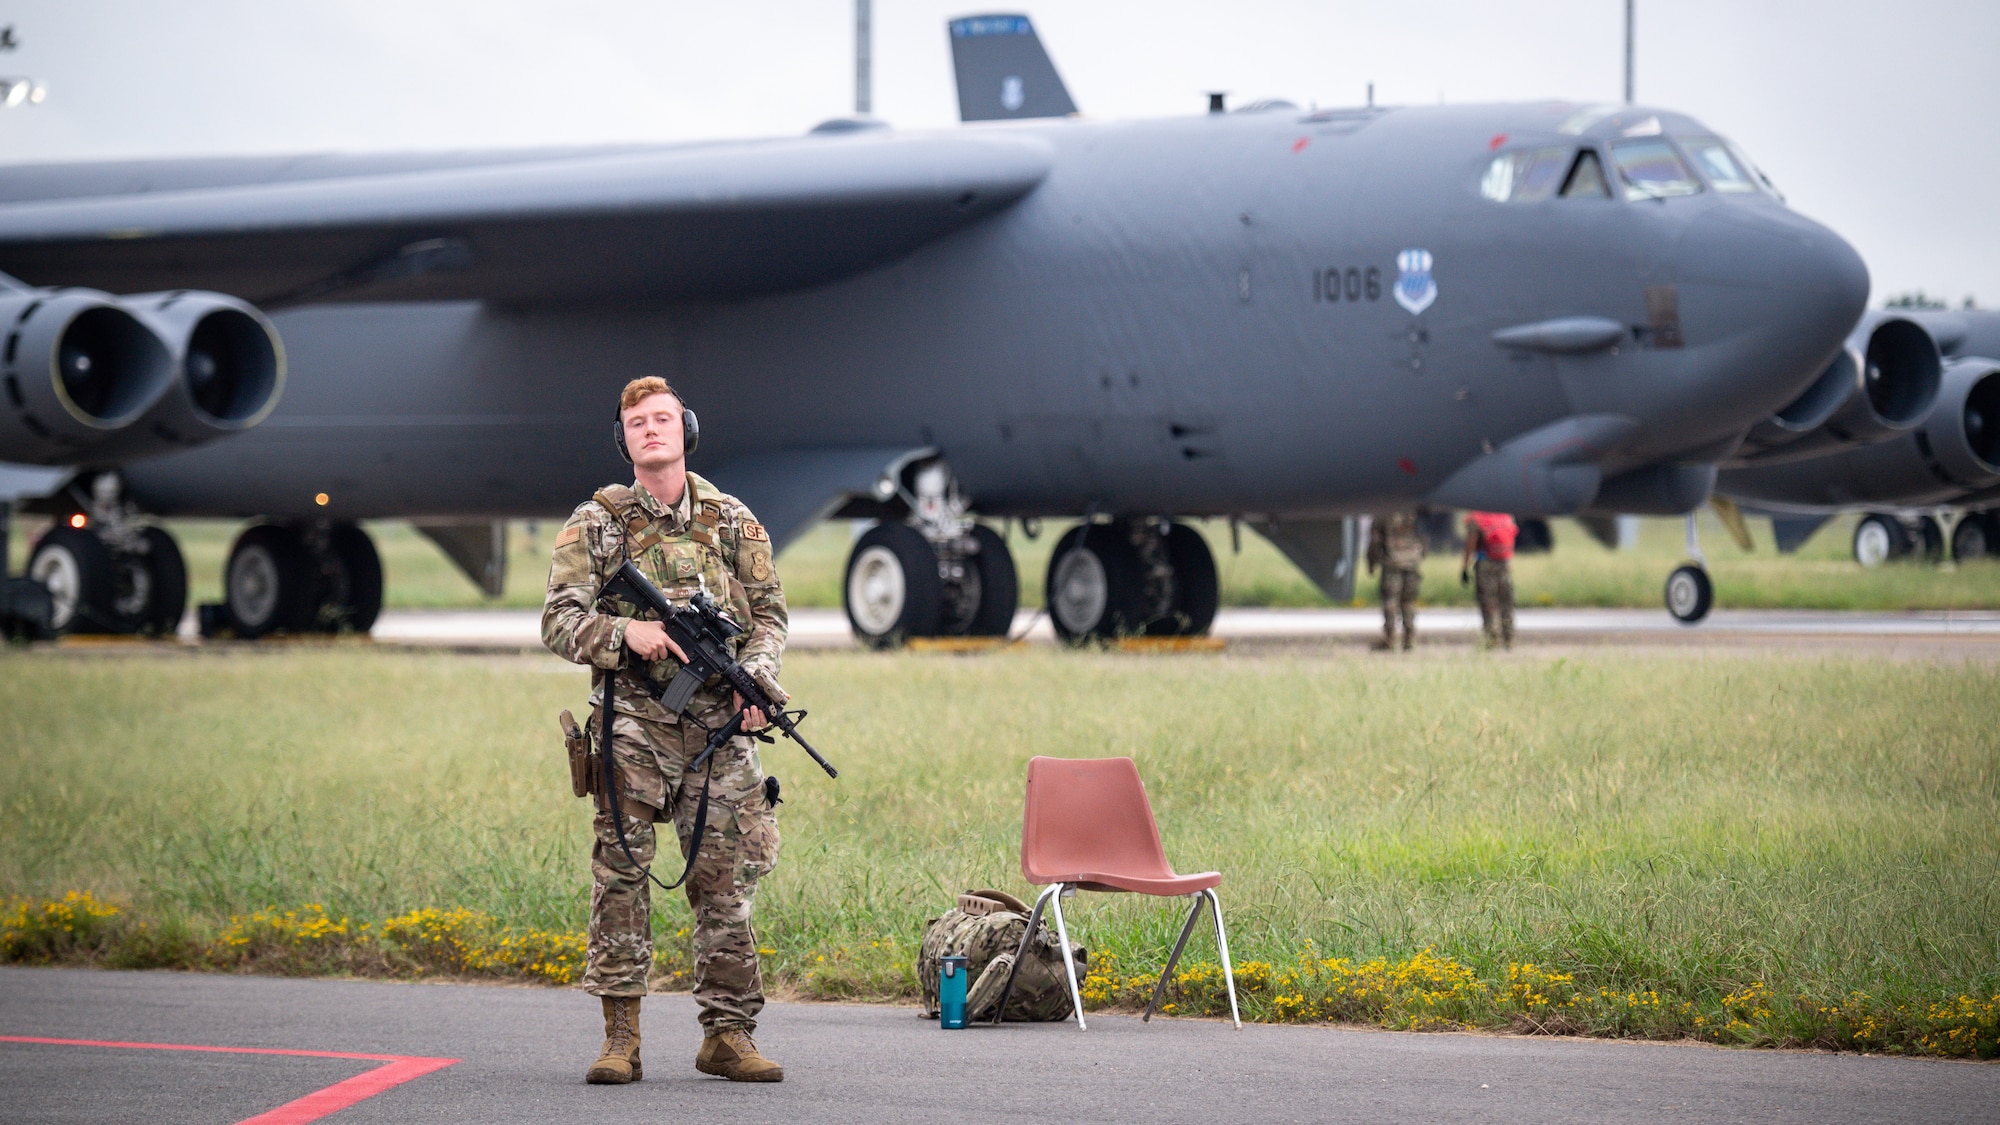 Senior Airman Devin Jodway, 2nd Security Forces Squadron installation patrolman, poses for a photo during a readiness exercise at Barksdale Air Force Base, La., Sept. 25, 2020.